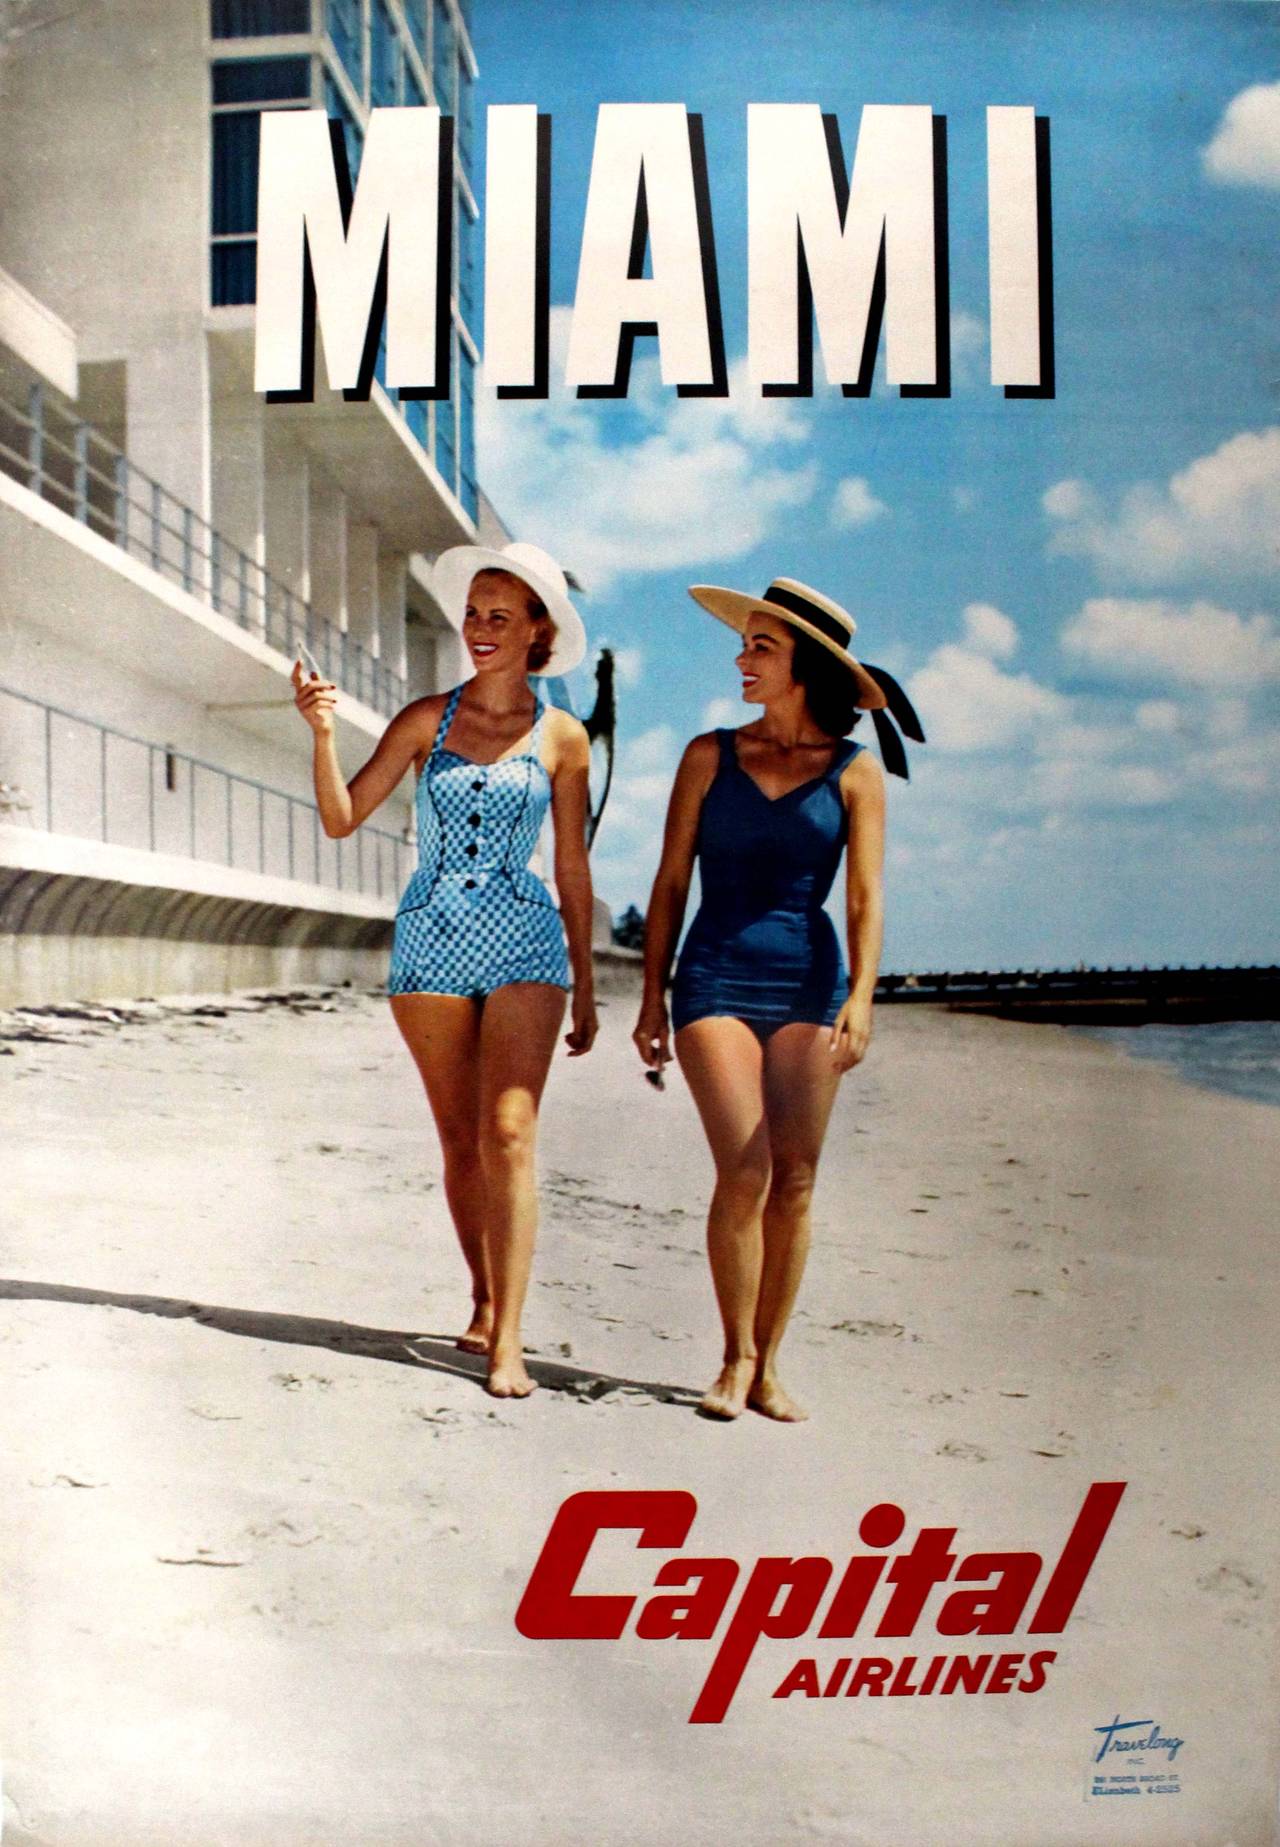 Unknown Print - Original Vintage Travel Advertising Poster For Miami Florida By Capital Airlines